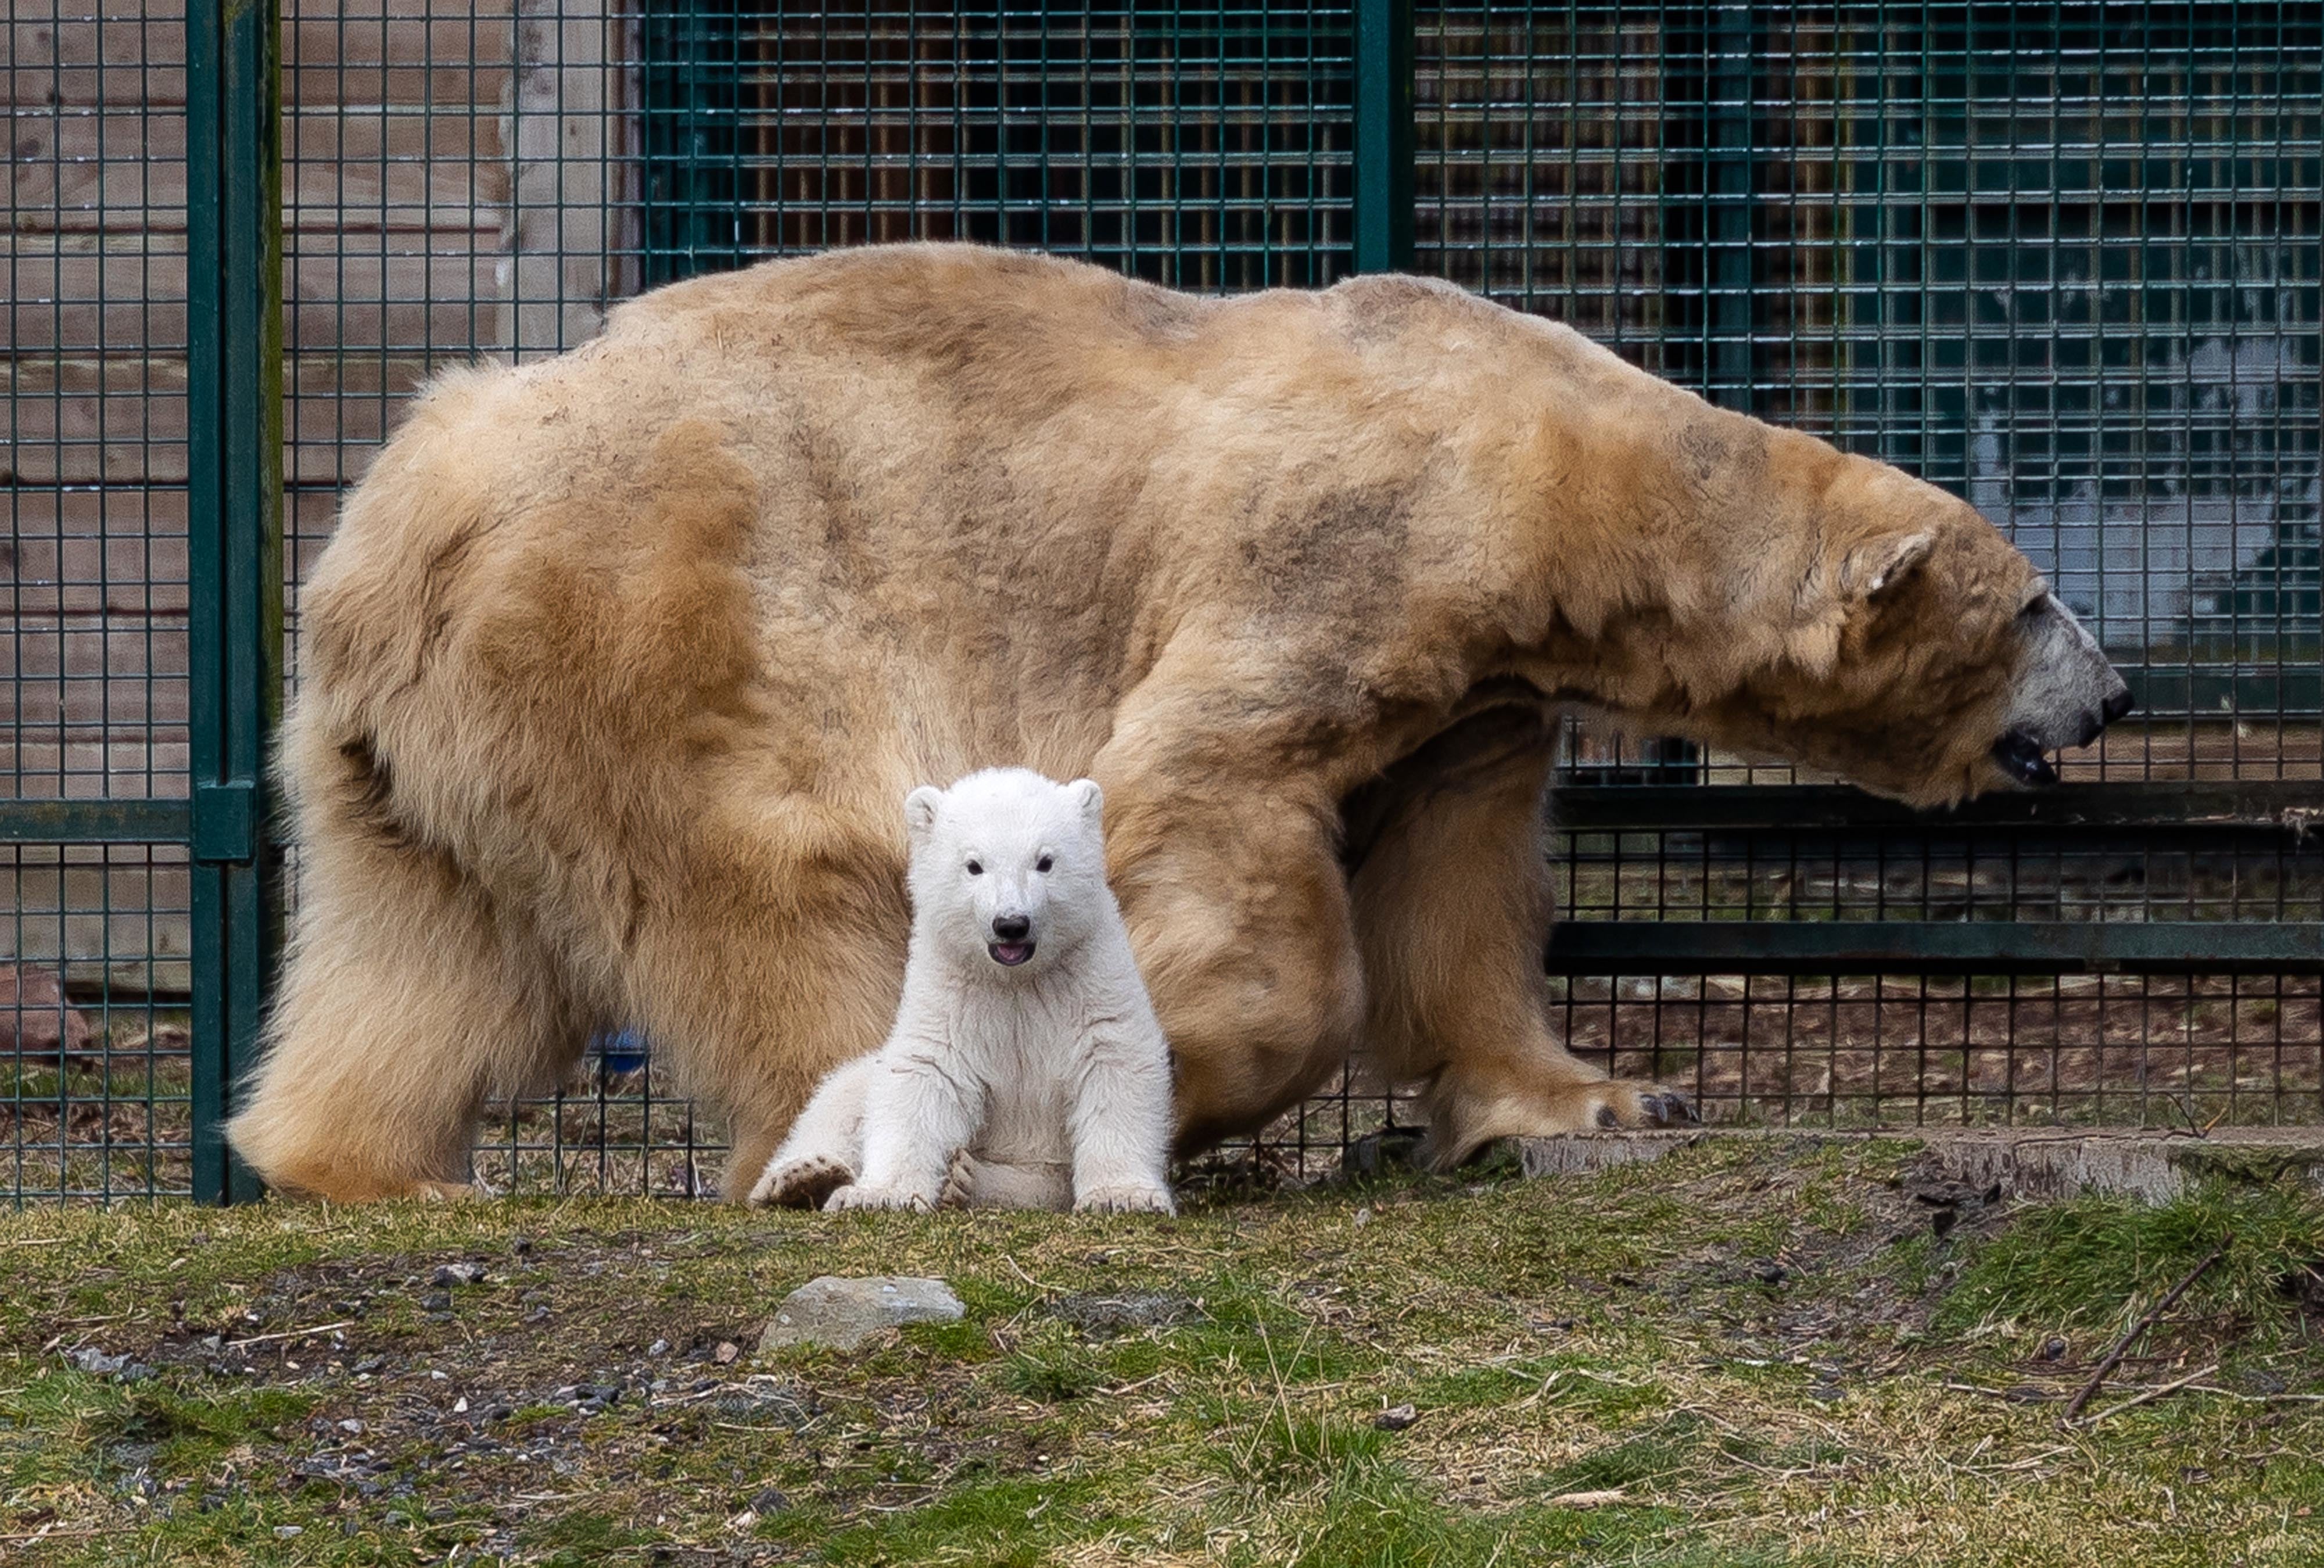 Recently born polar bear cub Brodie, born at the Highland Wildlife Park near Aviemore in the Highlands, explores its enclosure for the first time with his mother Victoria